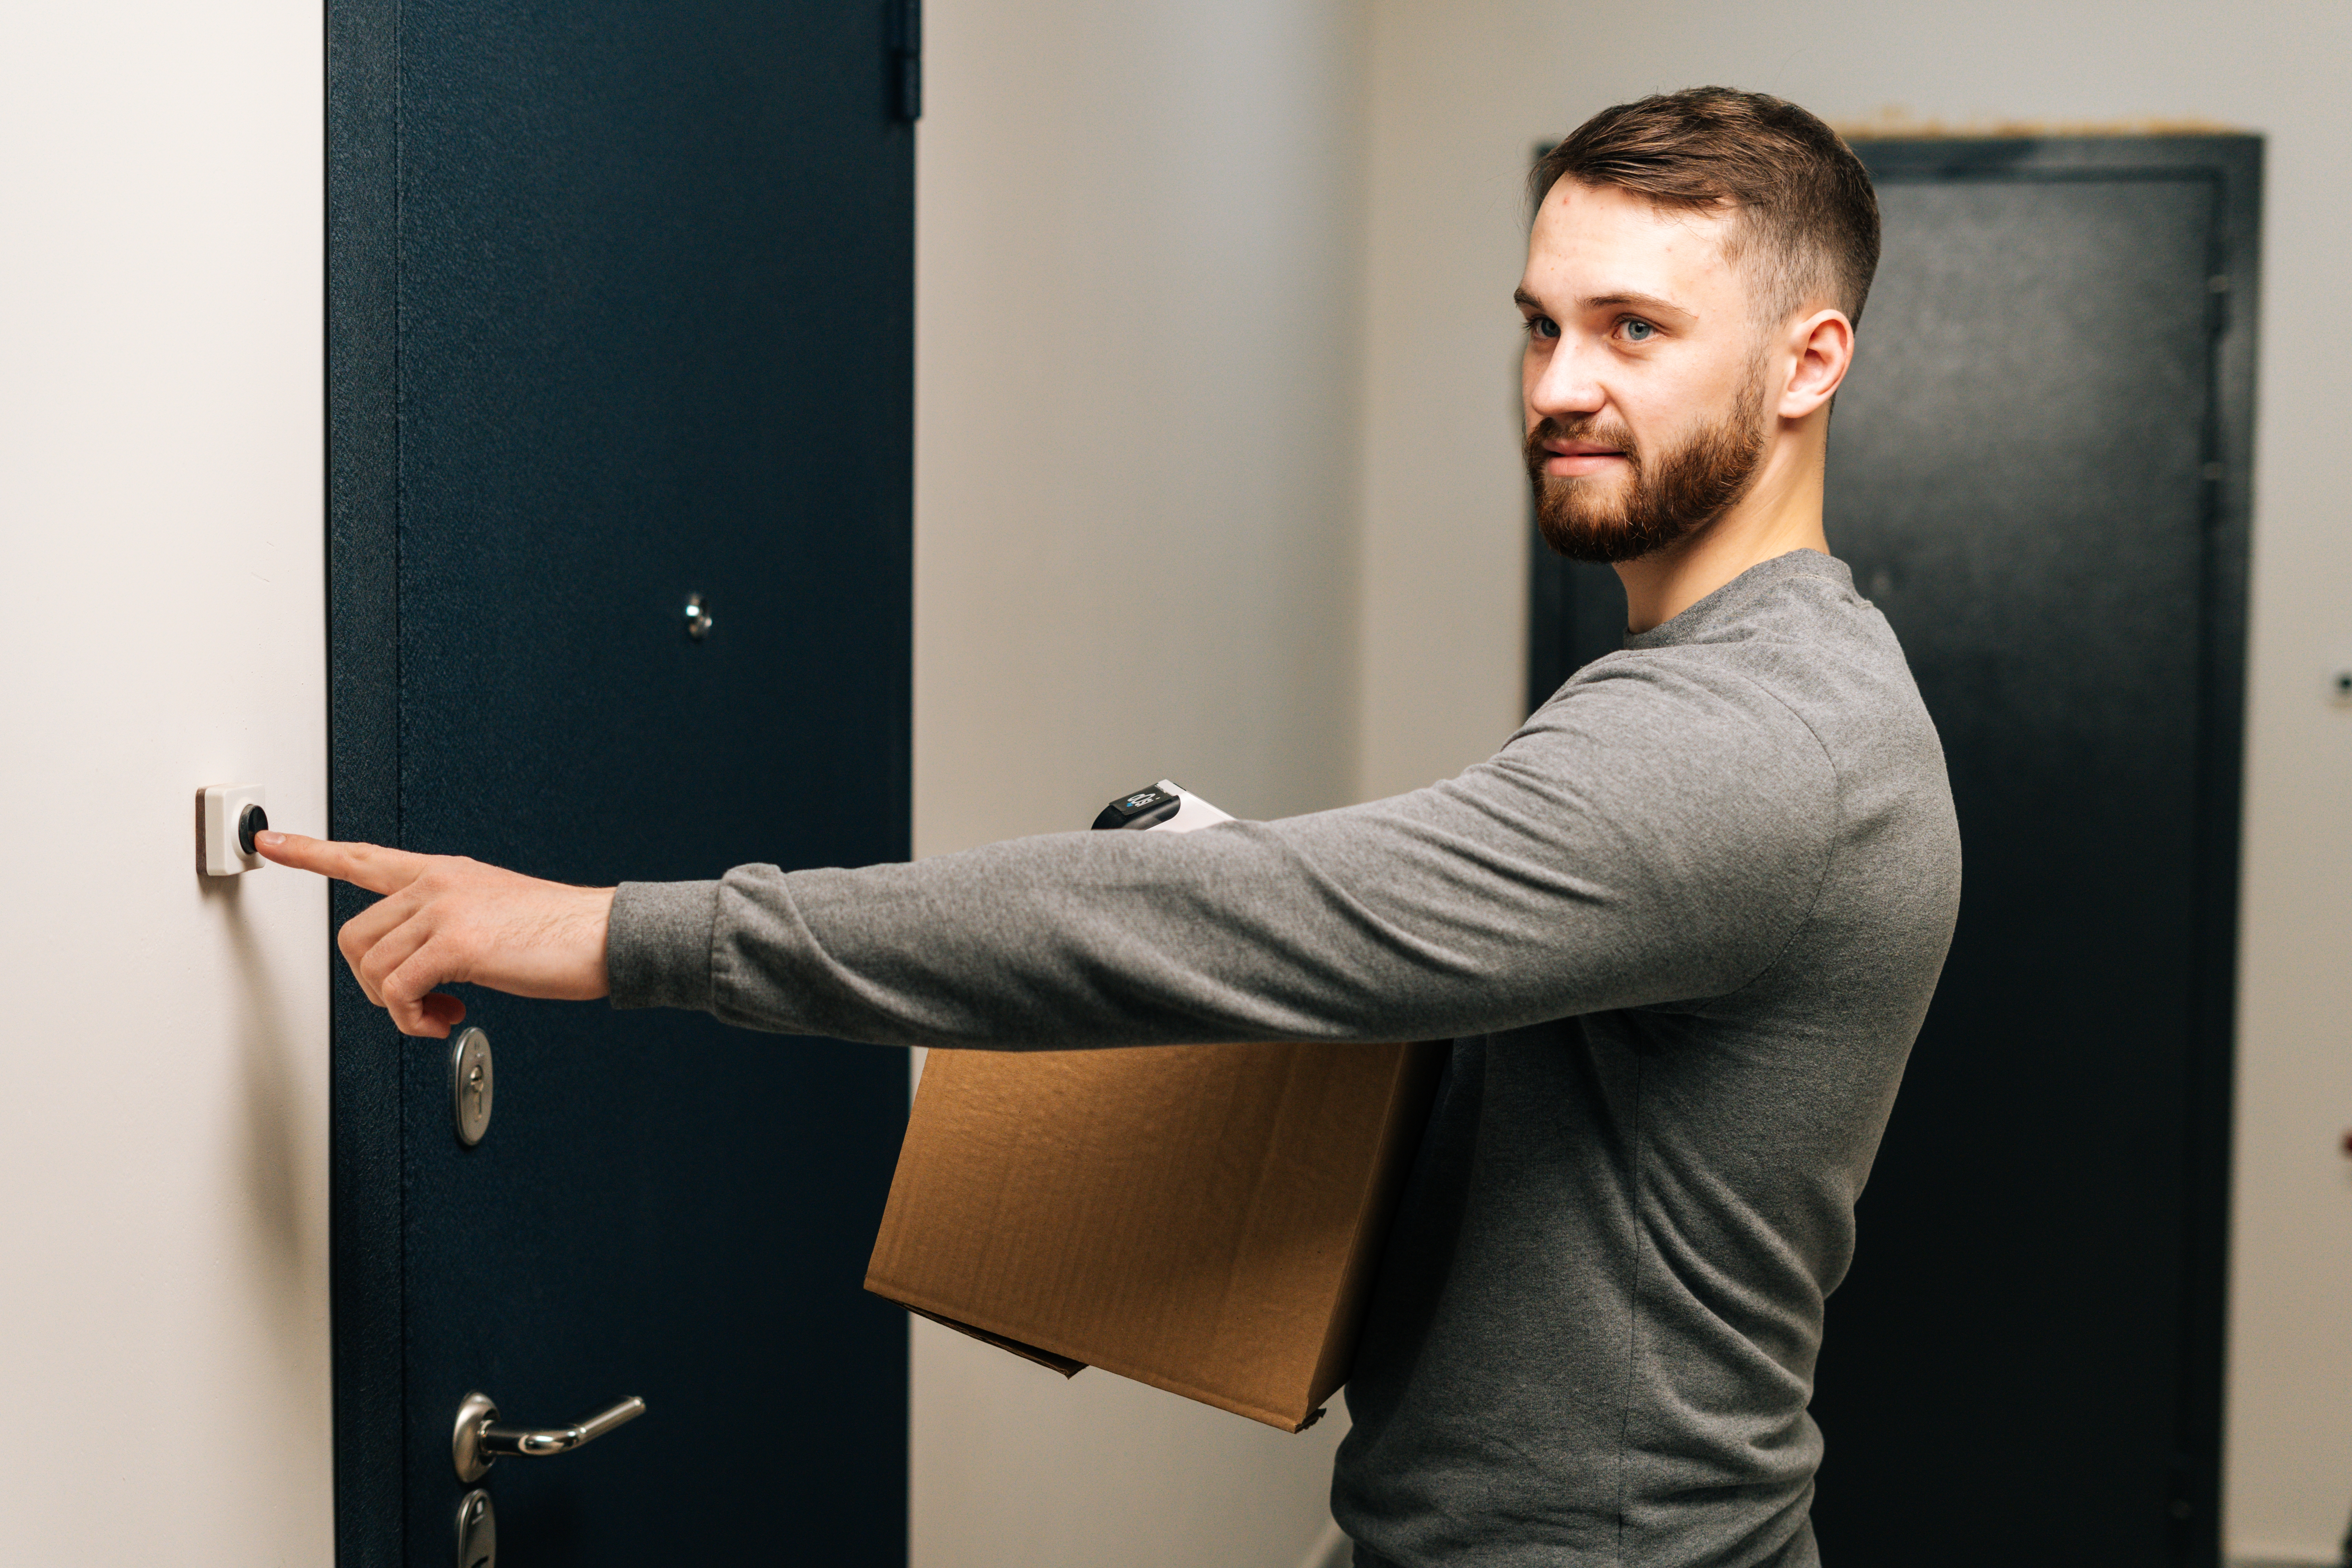 A delivery man ringing doorbell at a customer's apartment | Source: Shutterstock